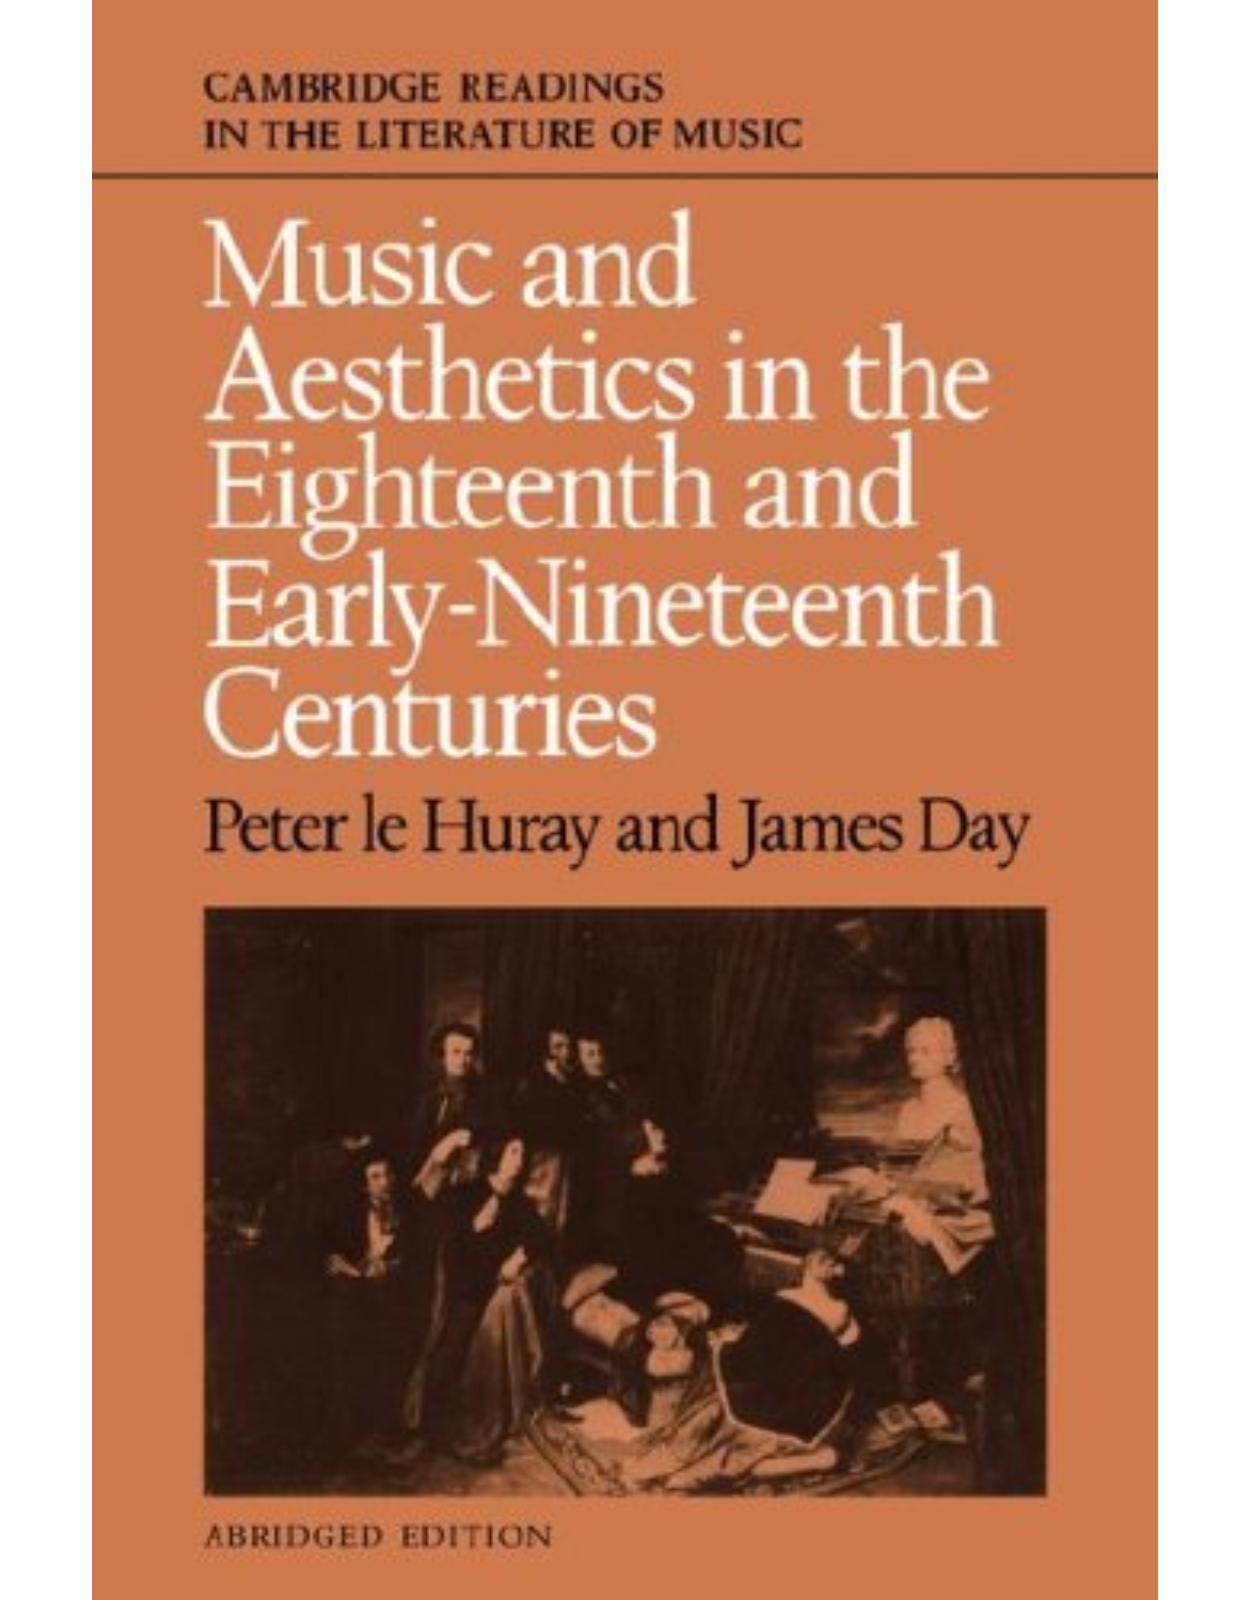 Music and Aesthetics in the Eighteenth and Early Nineteenth Centuries (Cambridge Readings in the Literature of Music) 